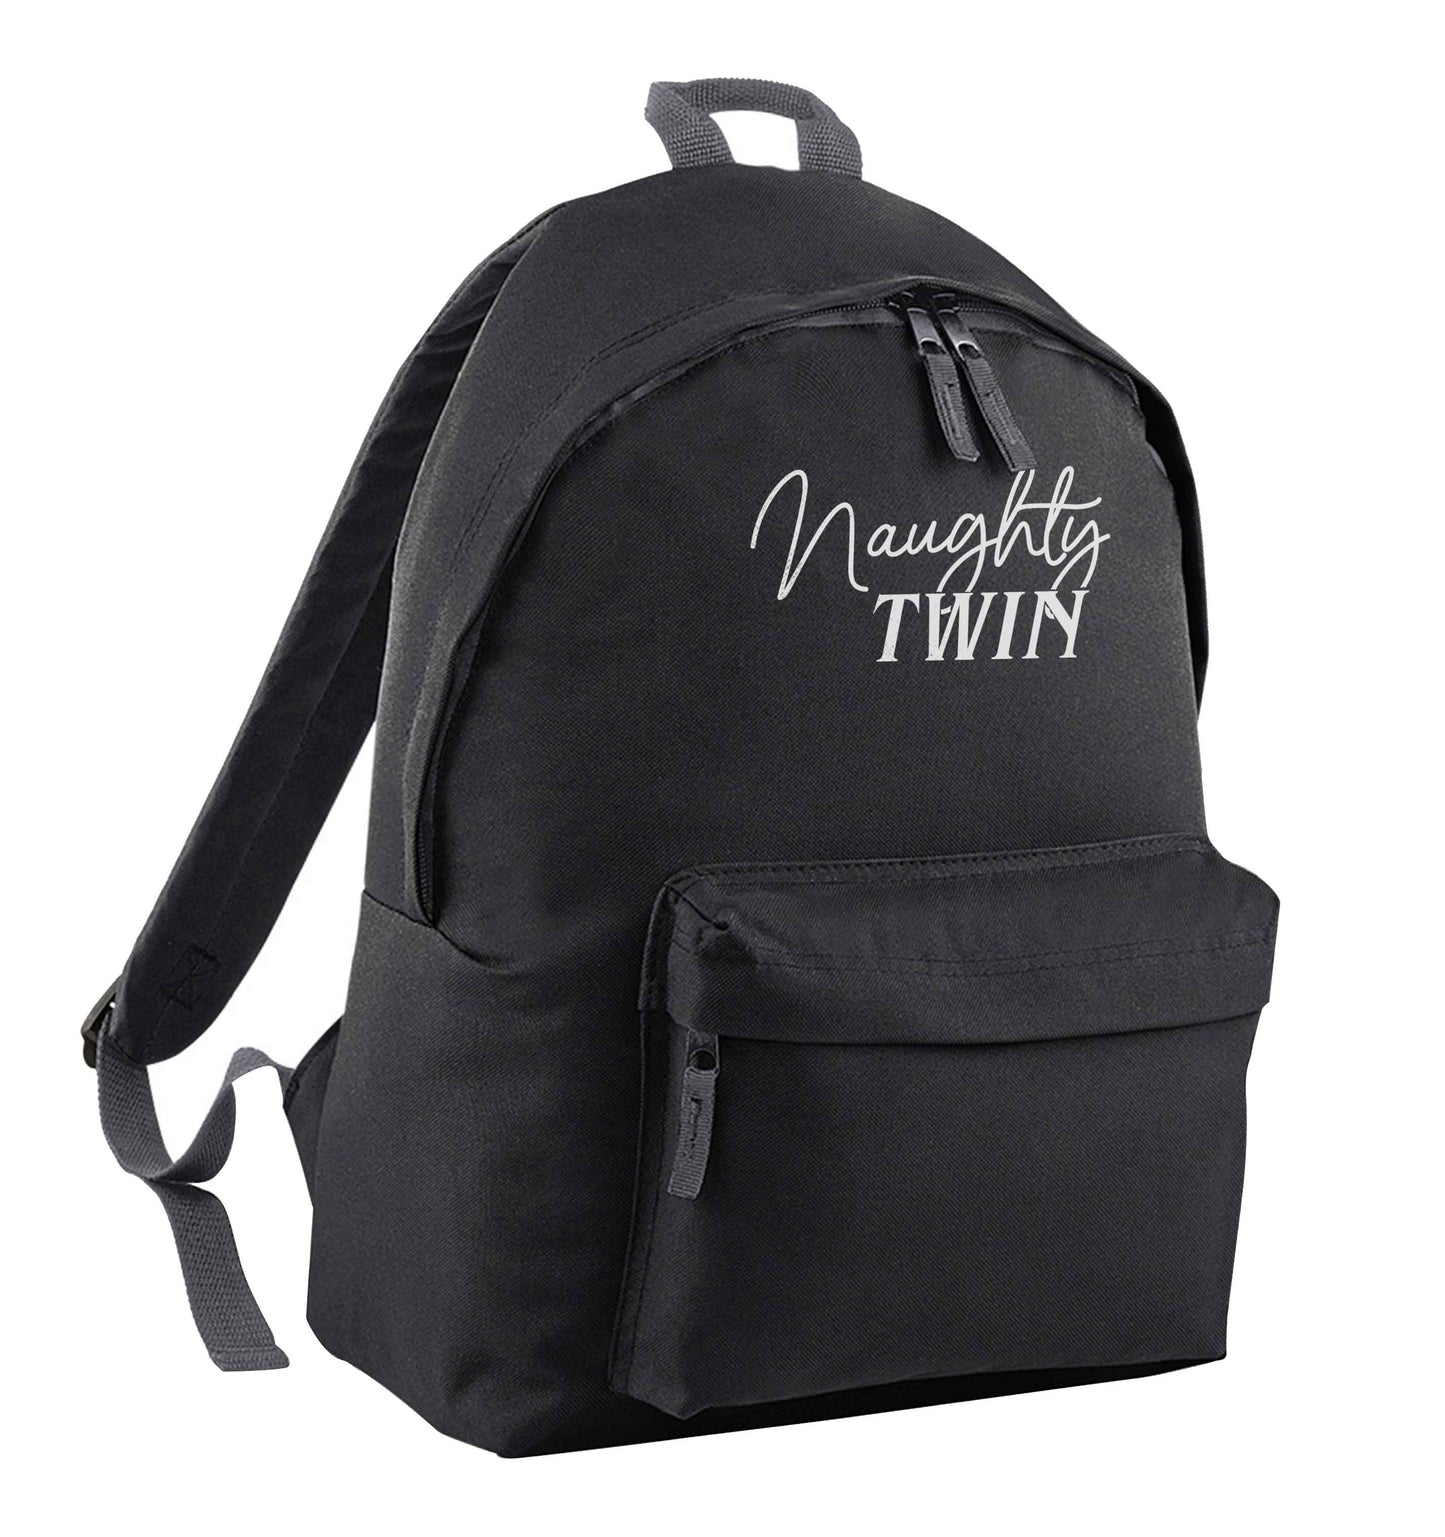 Naughty twin black adults backpack